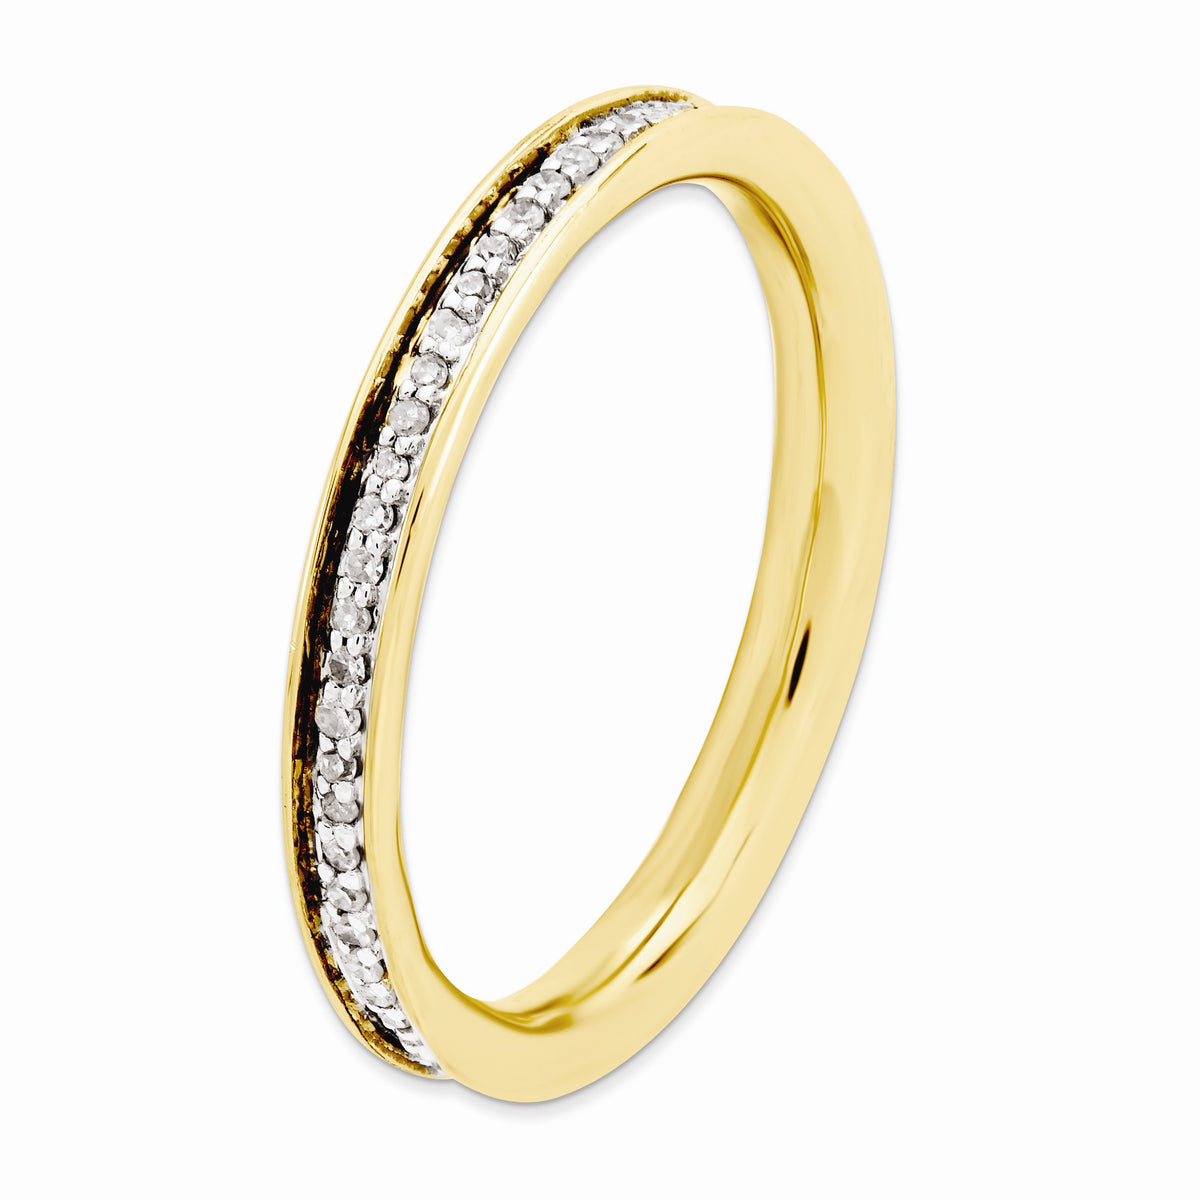 Alternate view of the 2.25mm 14K Gold Plated Silver Stackable 1/5 Cttw HI/I3 Diamond Band by The Black Bow Jewelry Co.